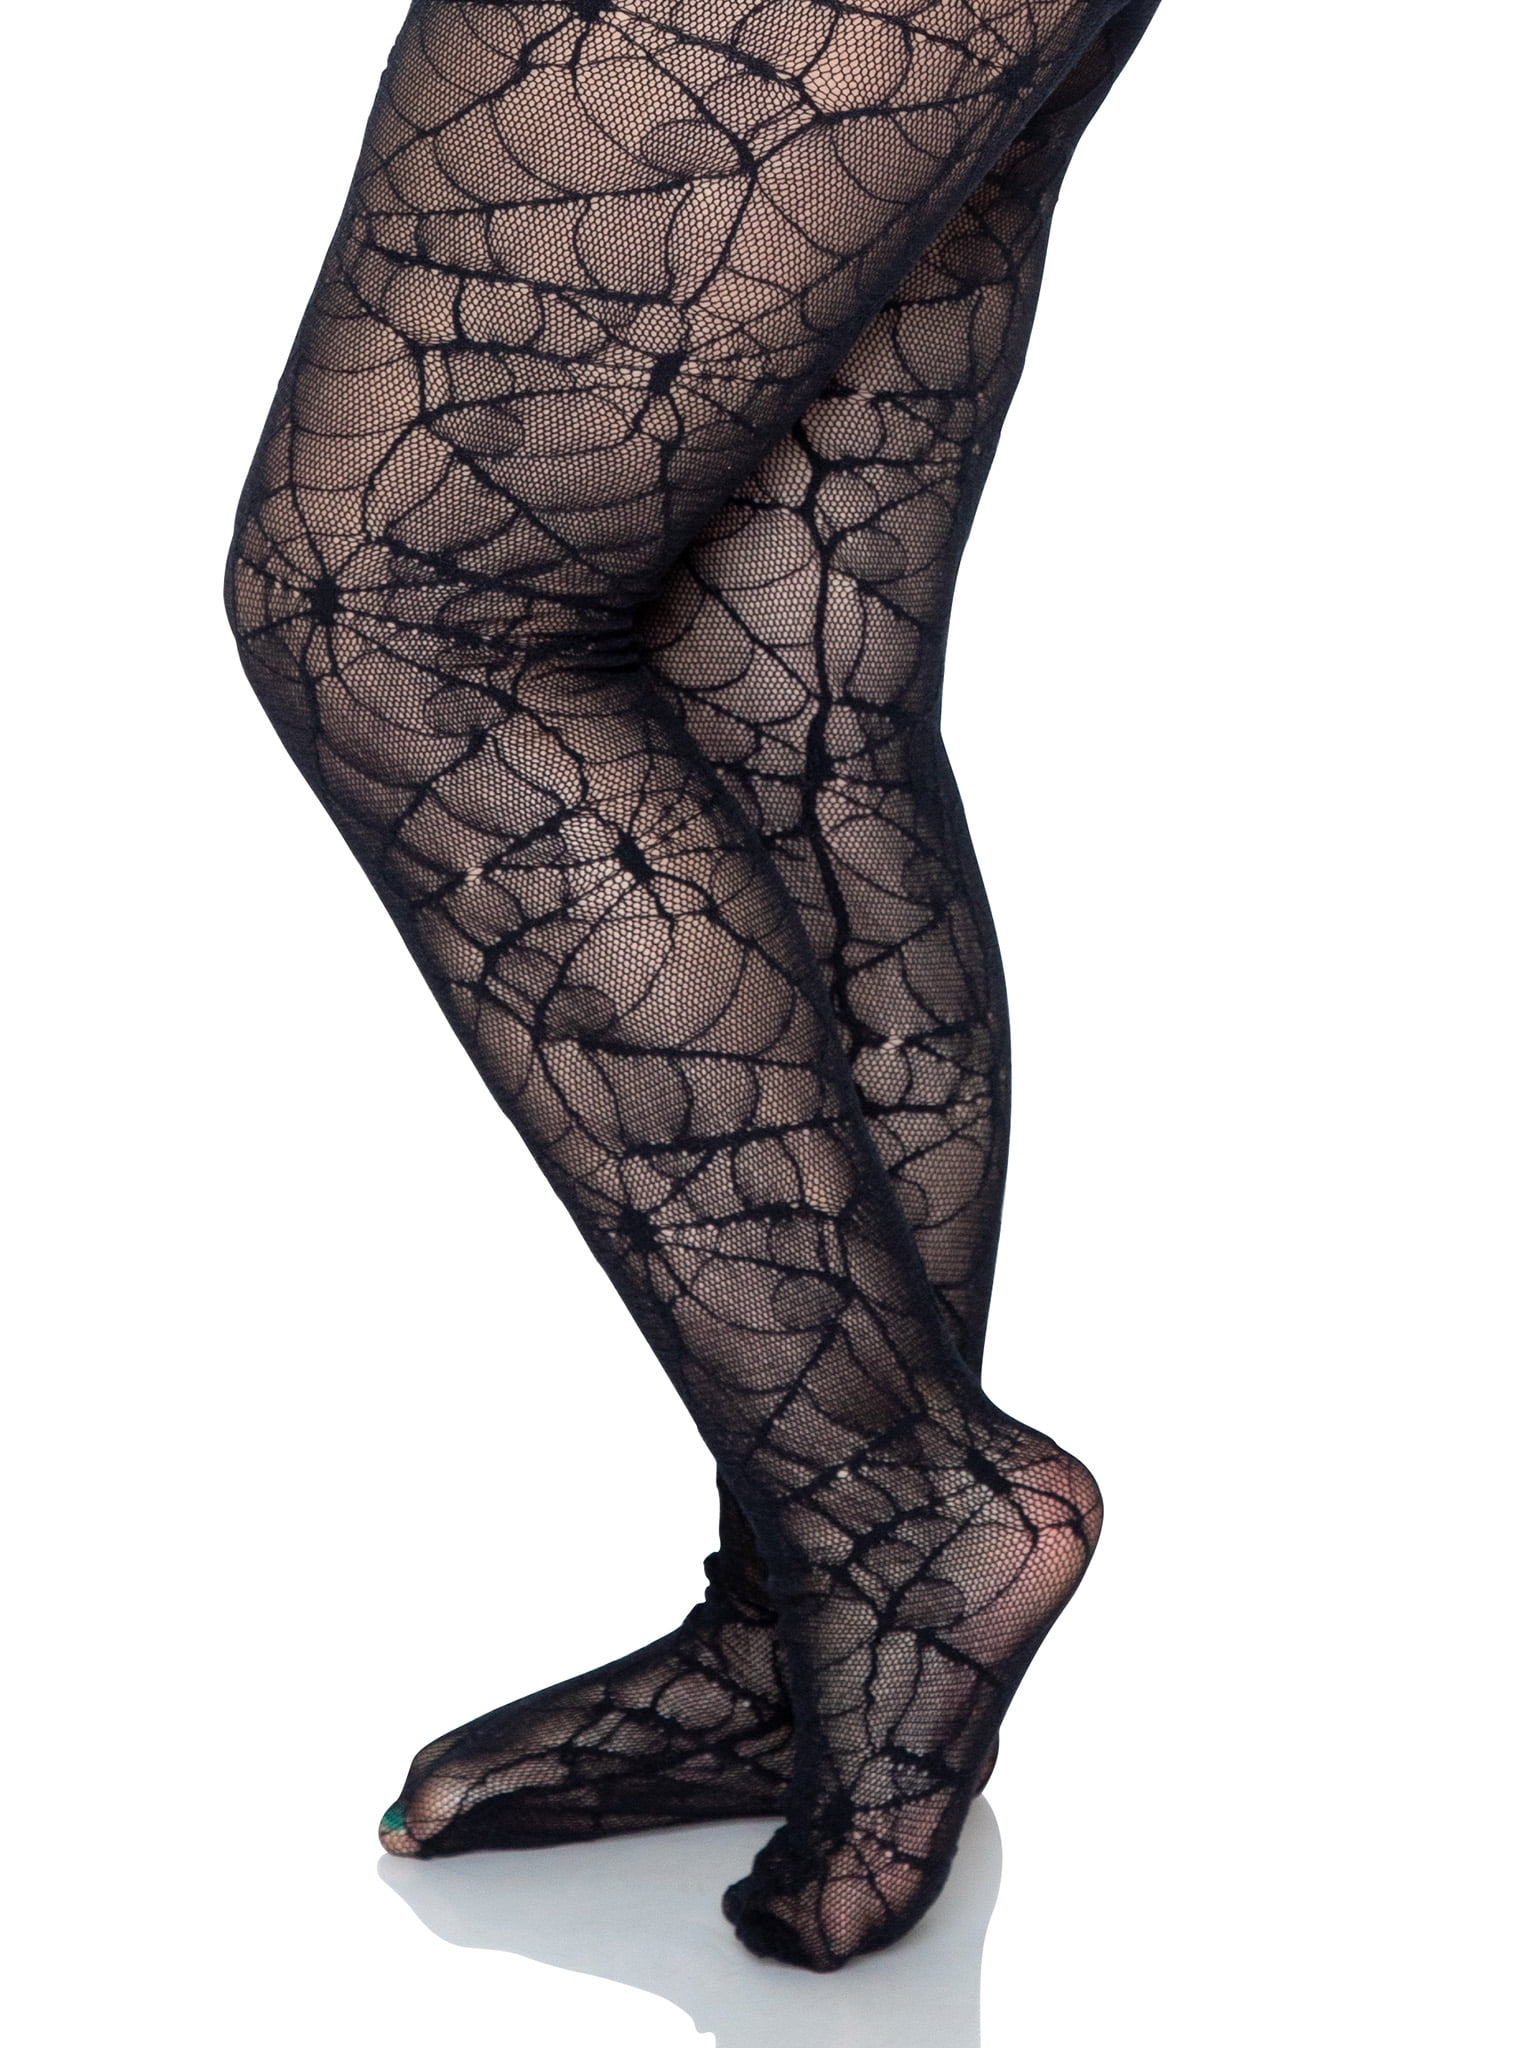 Halloween Girls Spider Web Lace Sheer Tights Costume Accessory, by Way to  Celebrate, Size L